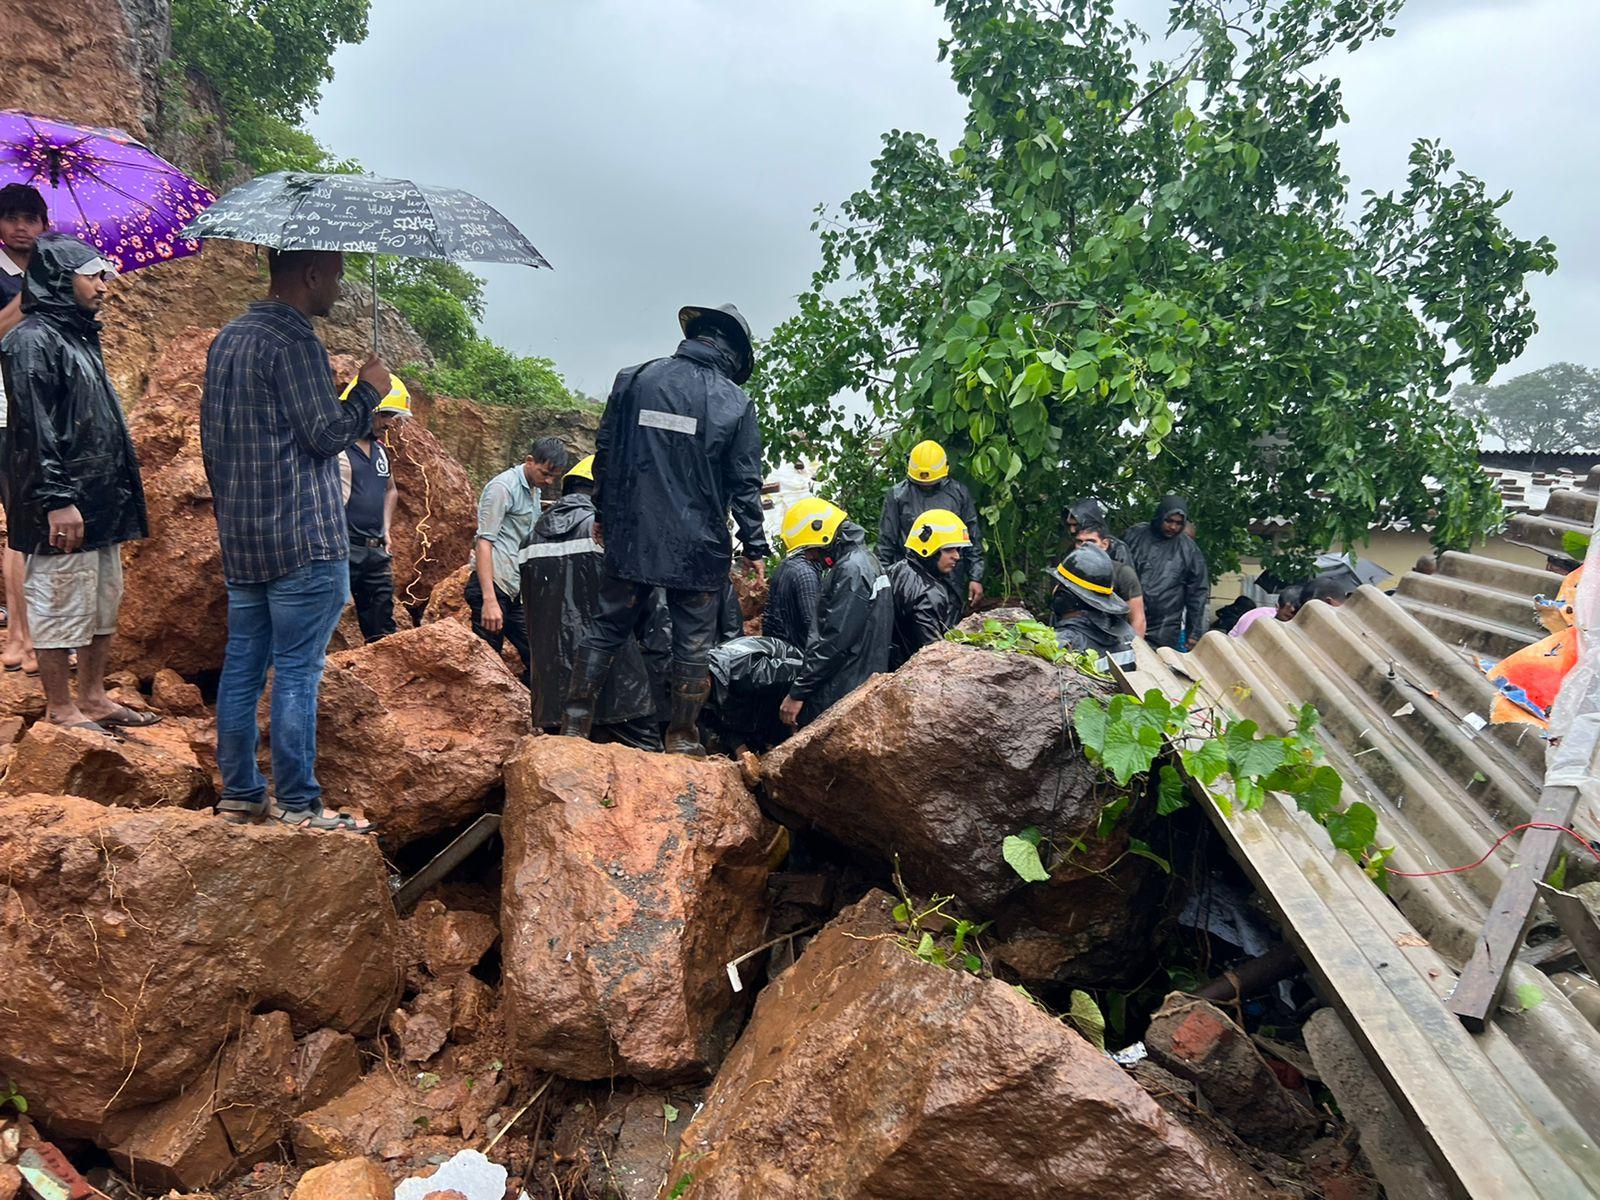 The district, located about 100 km from the state capital Mumbai, has been witnessing very heavy rains since Tuesday night which caused water-logging in many low lying areas.